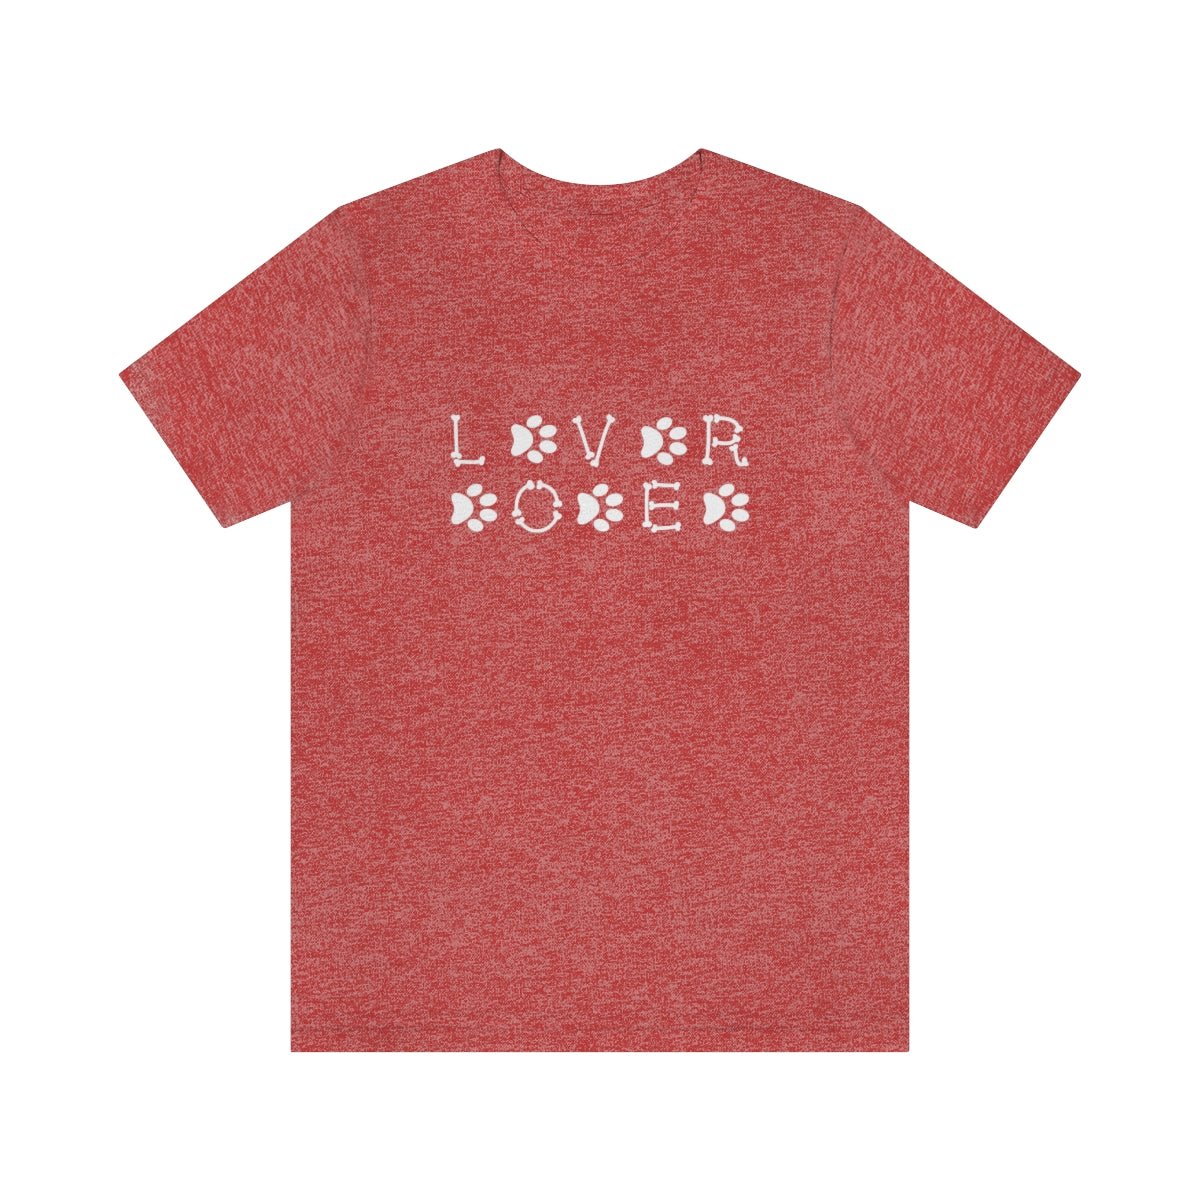 Dog Lover Women's Heathered Red Jersey Short Sleeve Tee - ZumBuys